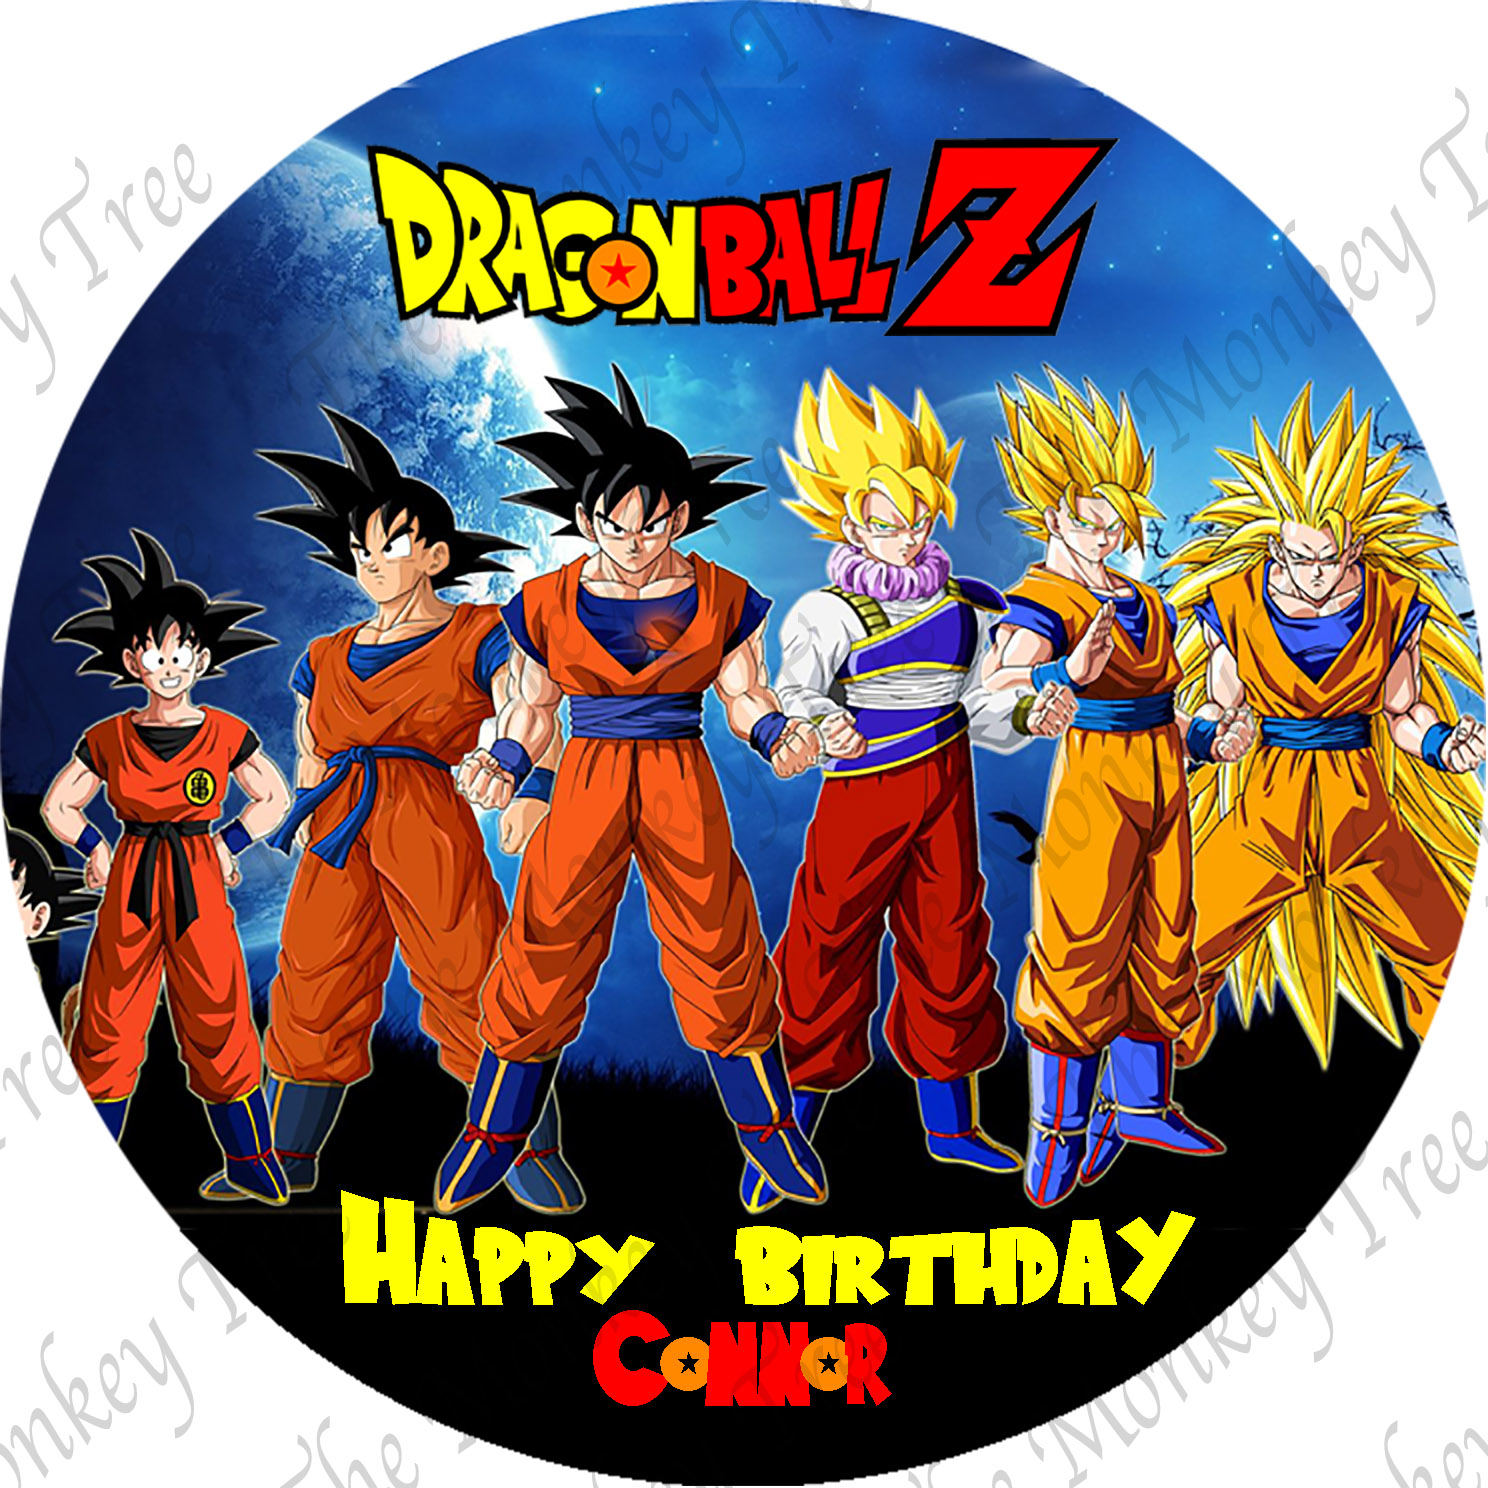 Dragon Ball Z Edible Cake Image Topper can be personalised! The